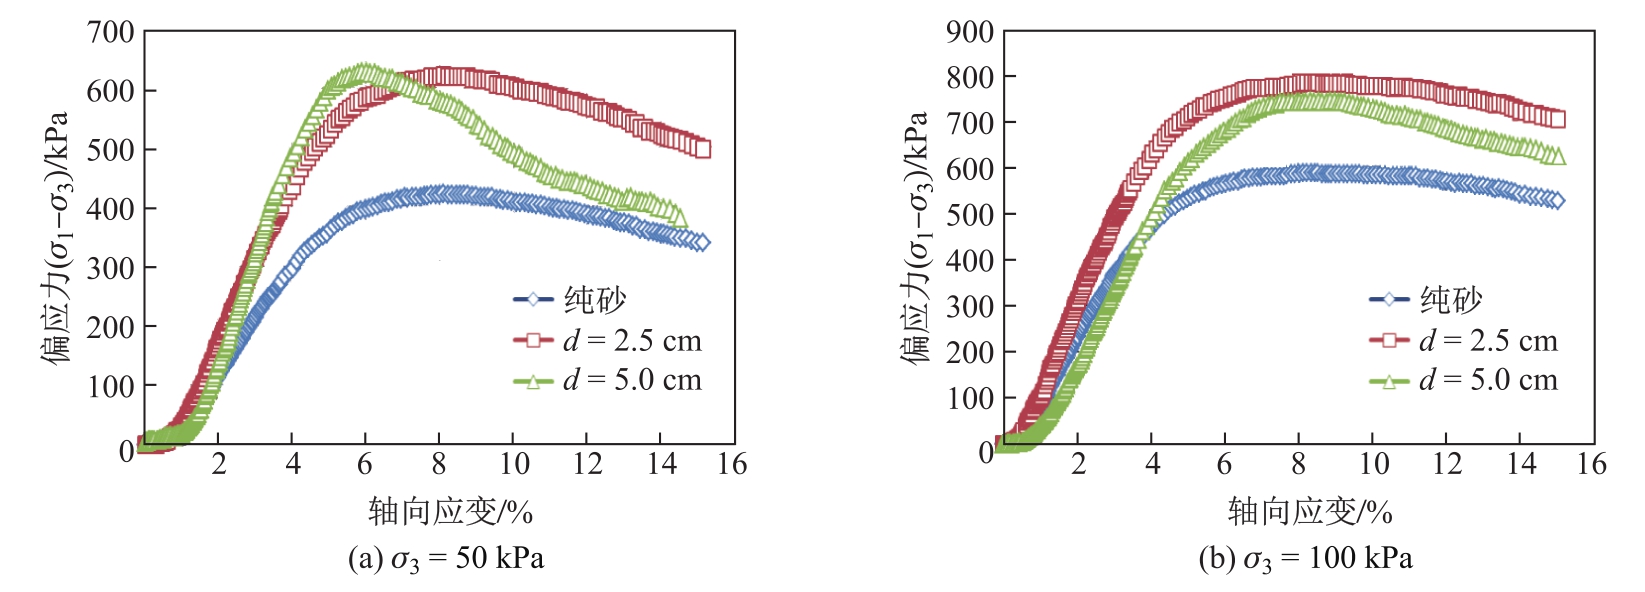 Stress-strain curves of the reinforced sand(h=2 cm)